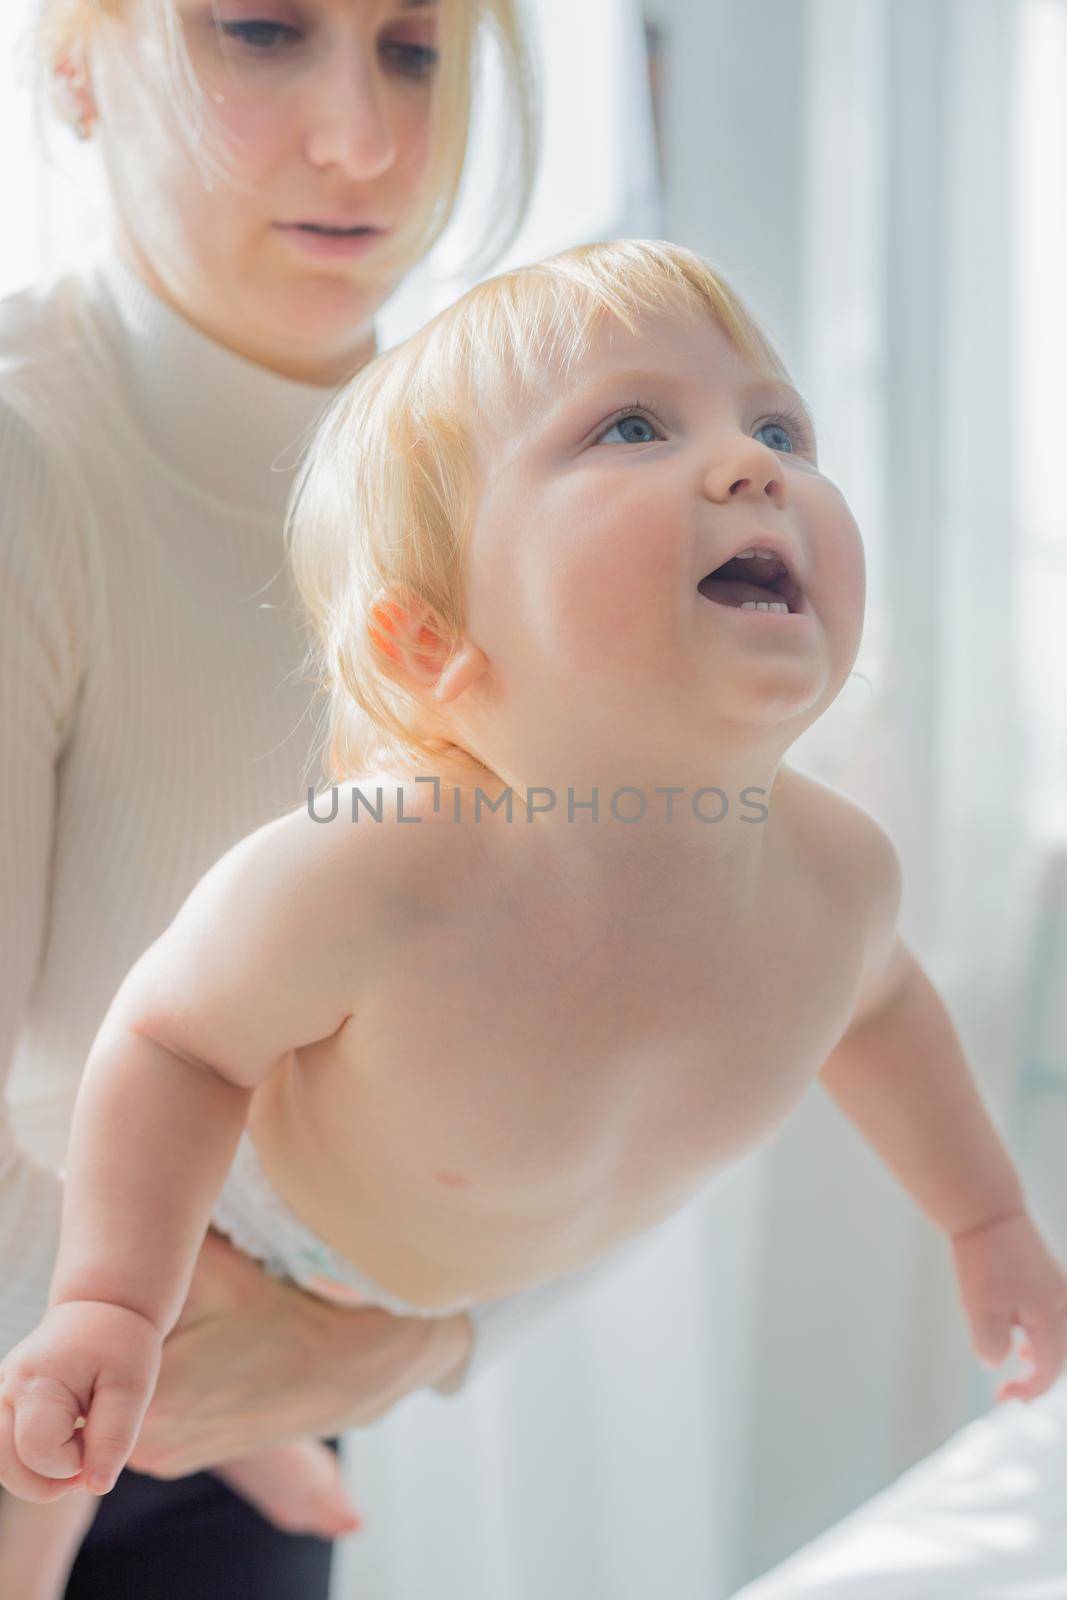 Mom does children's gymnastics for the baby, holding him by the chest. Close-up. Happy child is trying to climb.